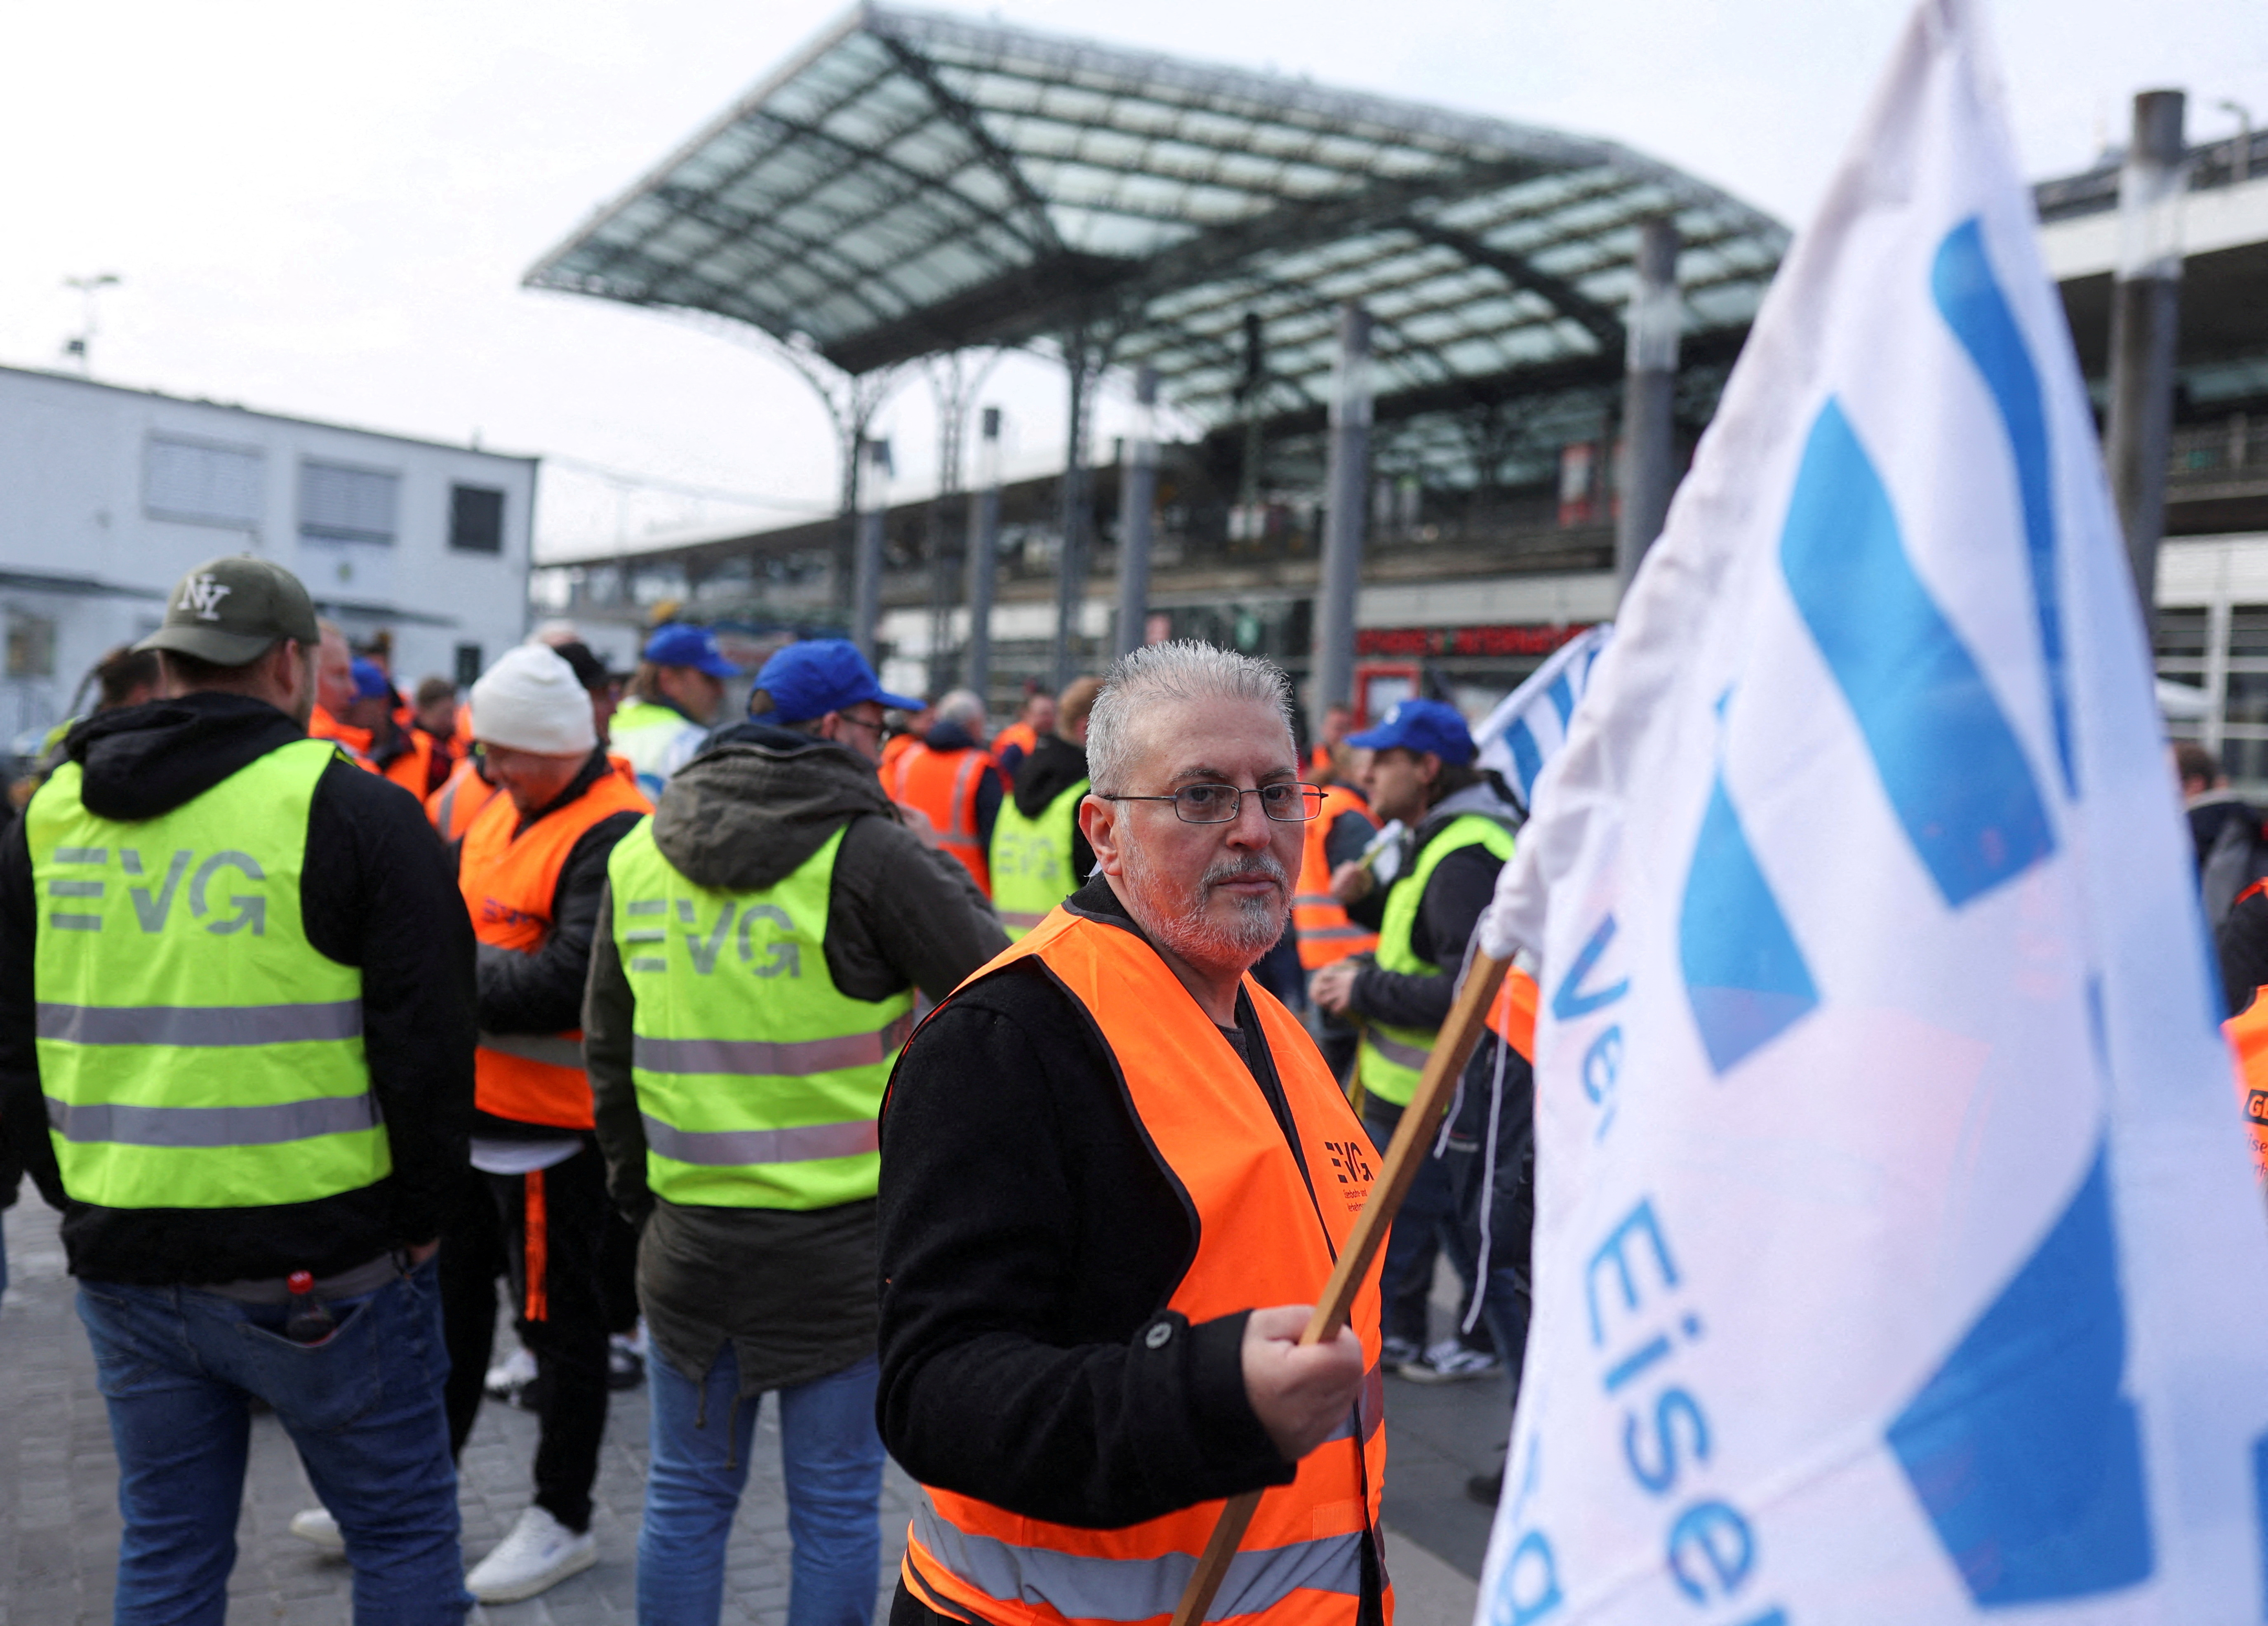 warehouse workers go on strike in Germany over Covid-19